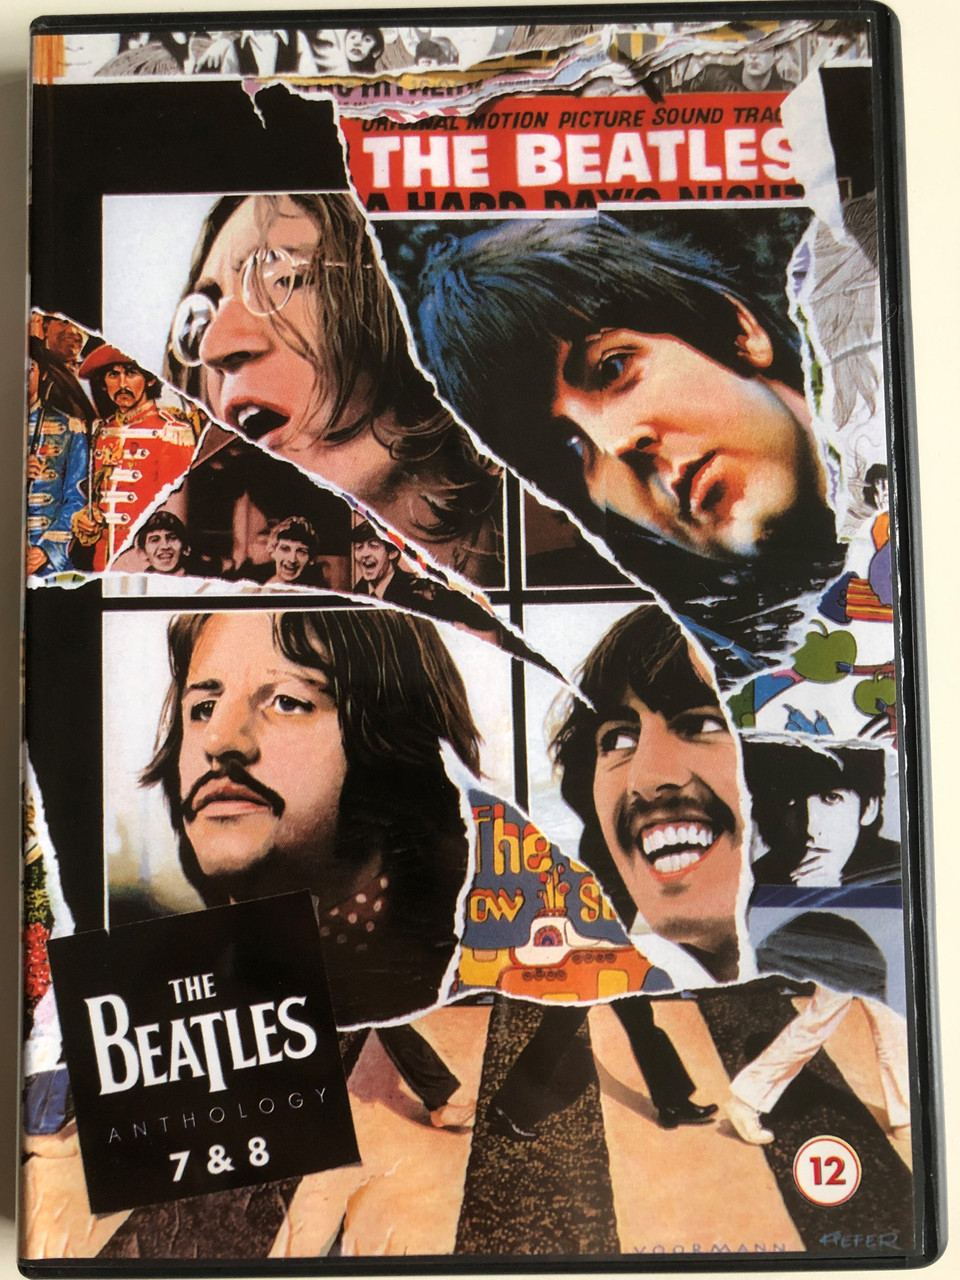 The Beatles Anthology 7 & 8 DVD 2003 / Episodes 7, 8 / Directed by Geoff  Wonfor / Apple Records / 2 Episodes - bibleinmylanguage